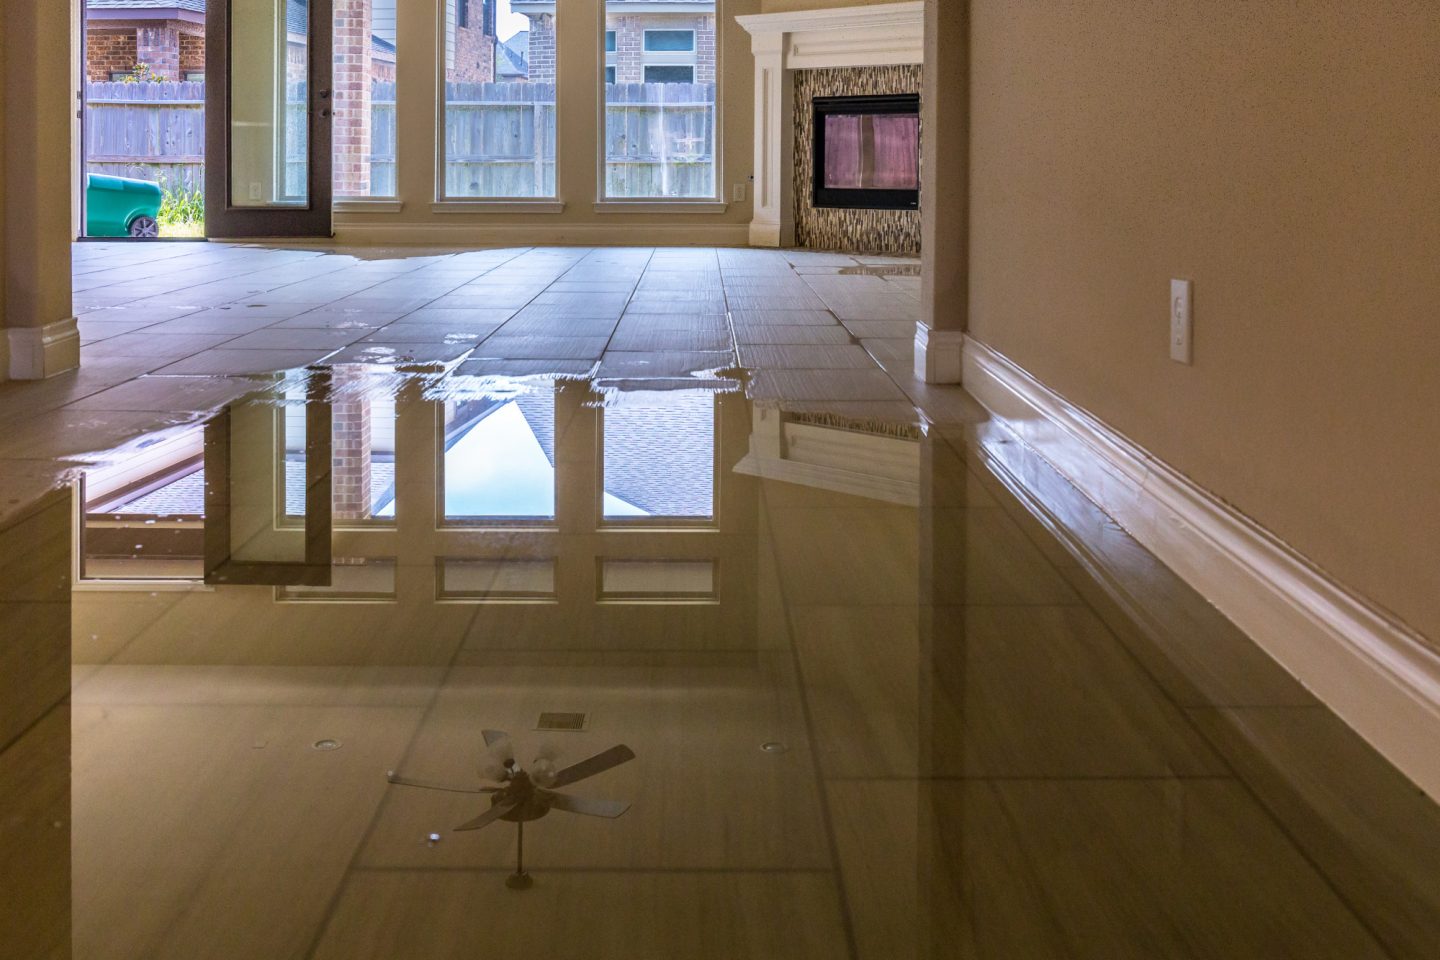 Signs of Water Damage that Indicate Previous Flooding